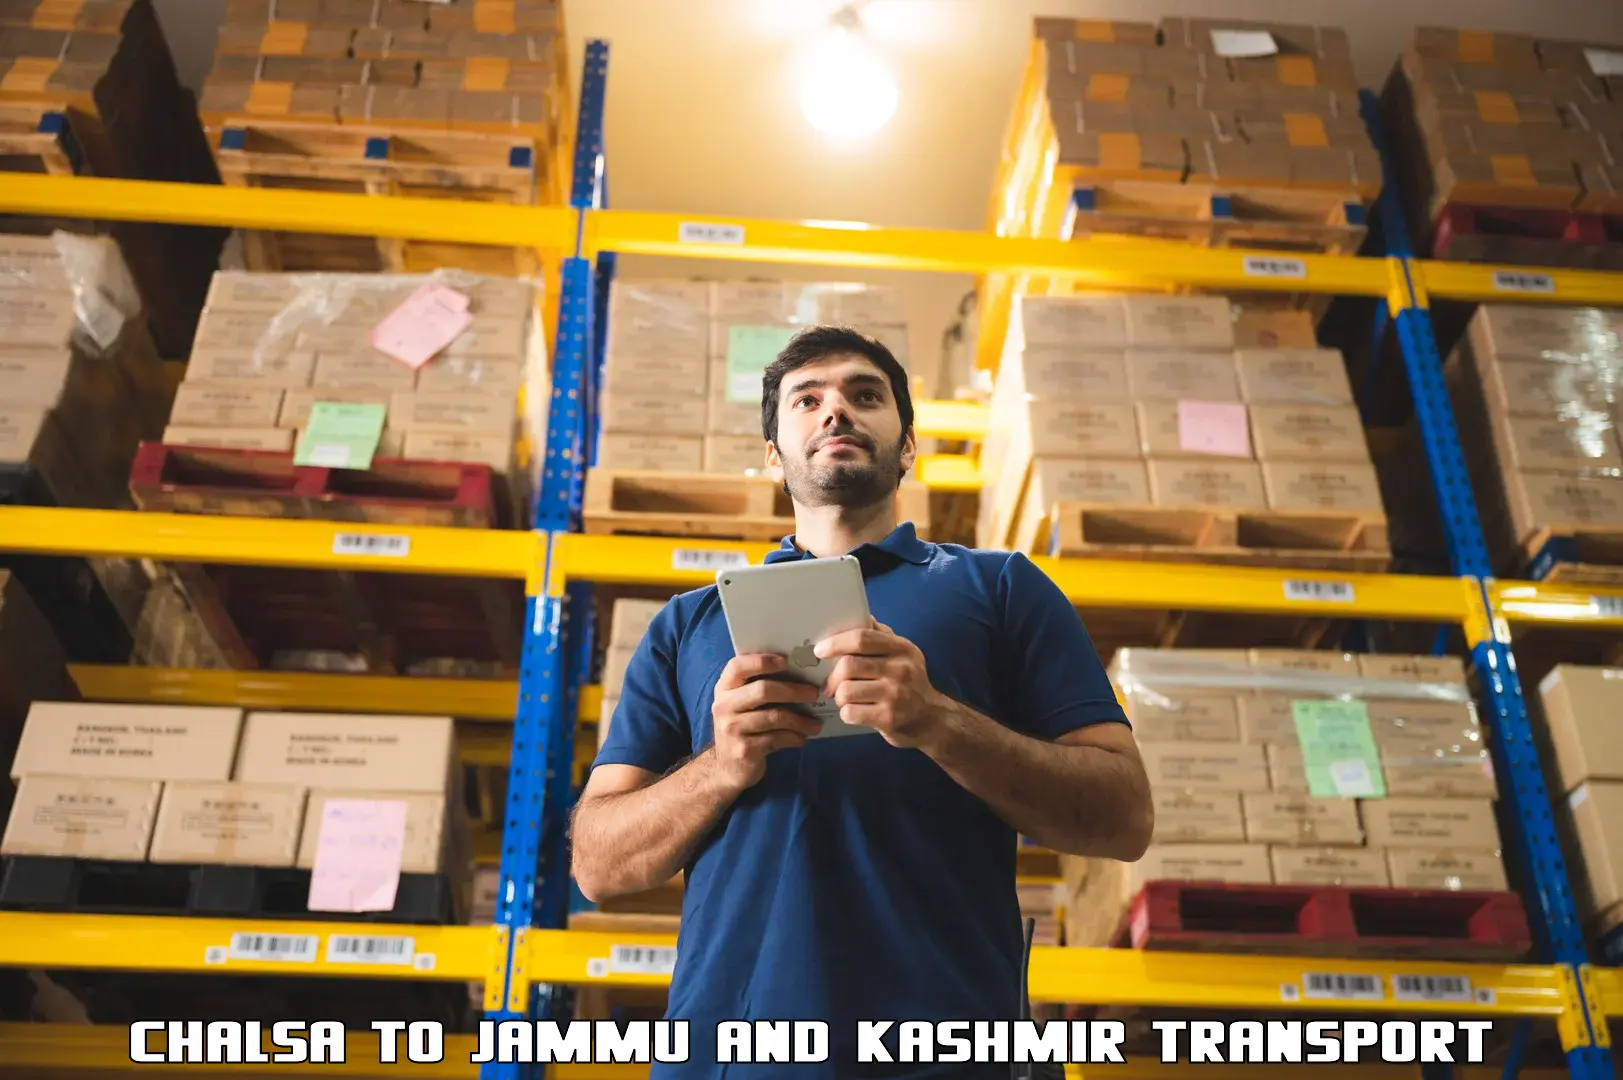 Container transport service Chalsa to Jammu